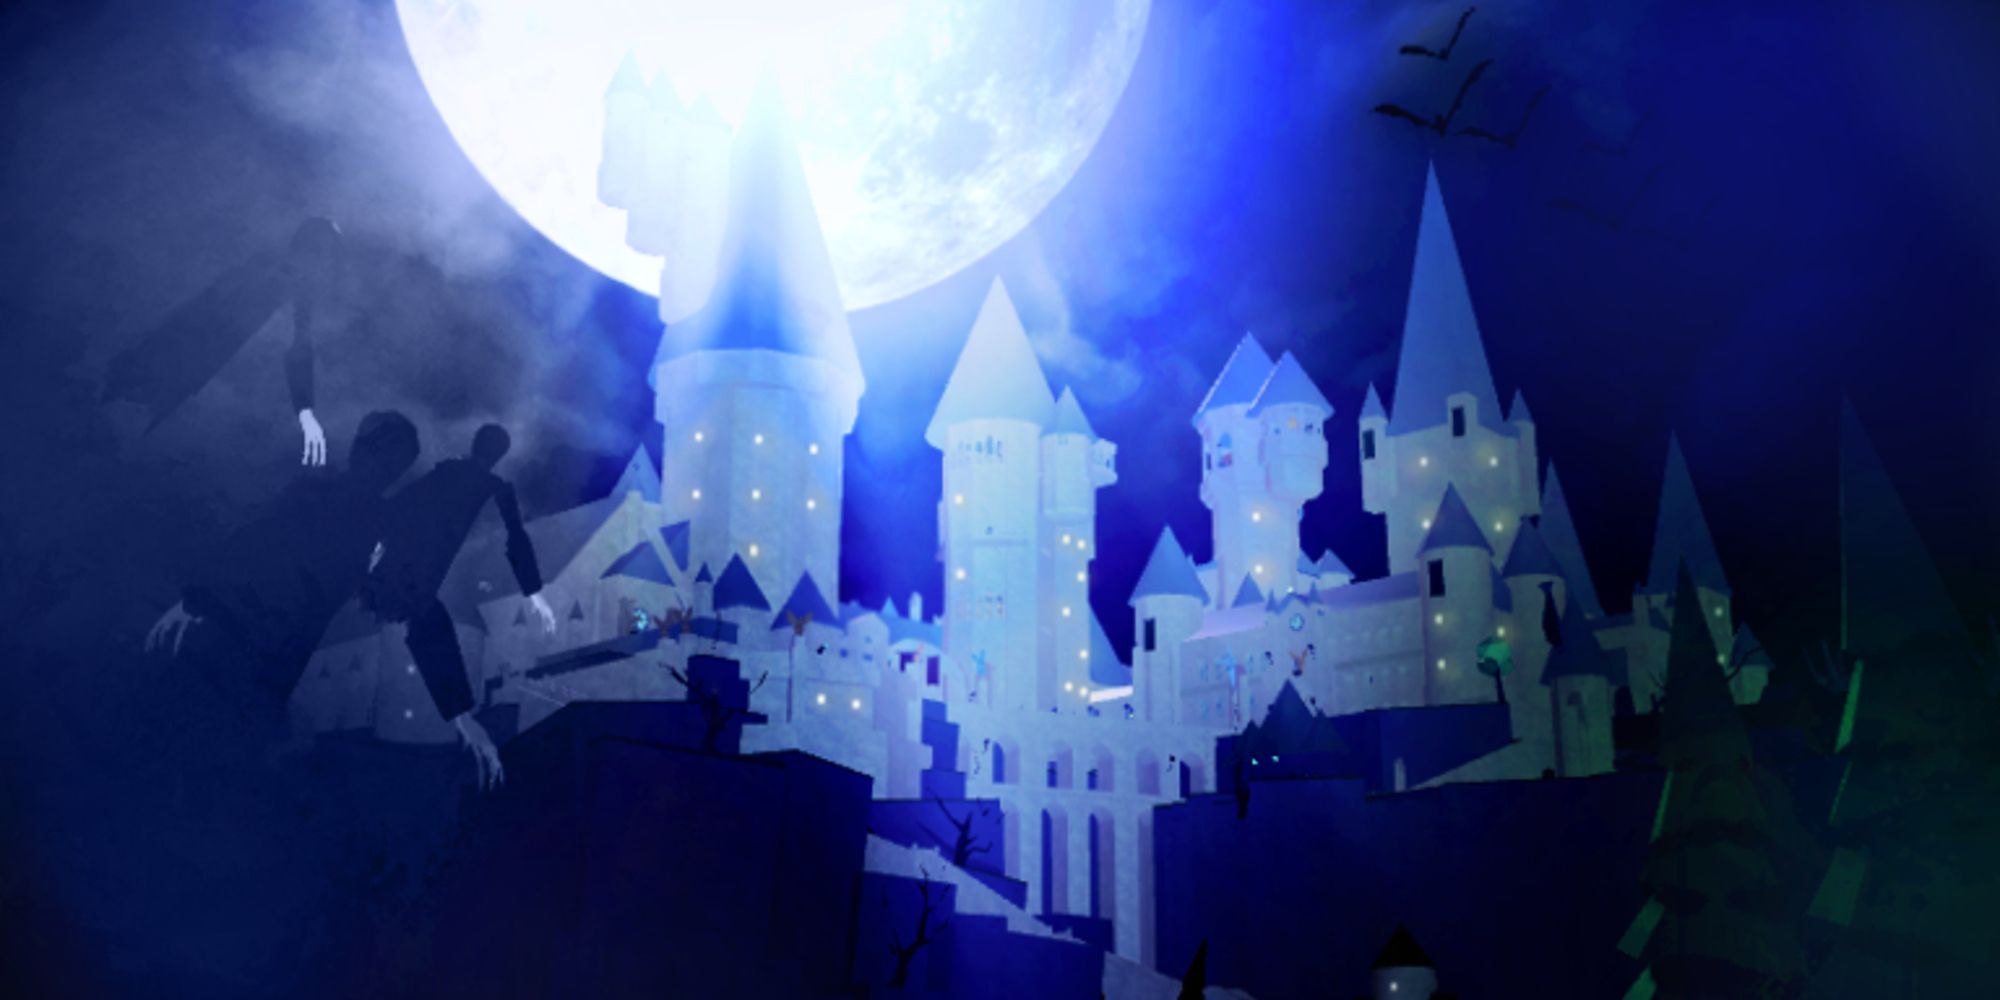 roblox ro-wizard official screenshot showing castle